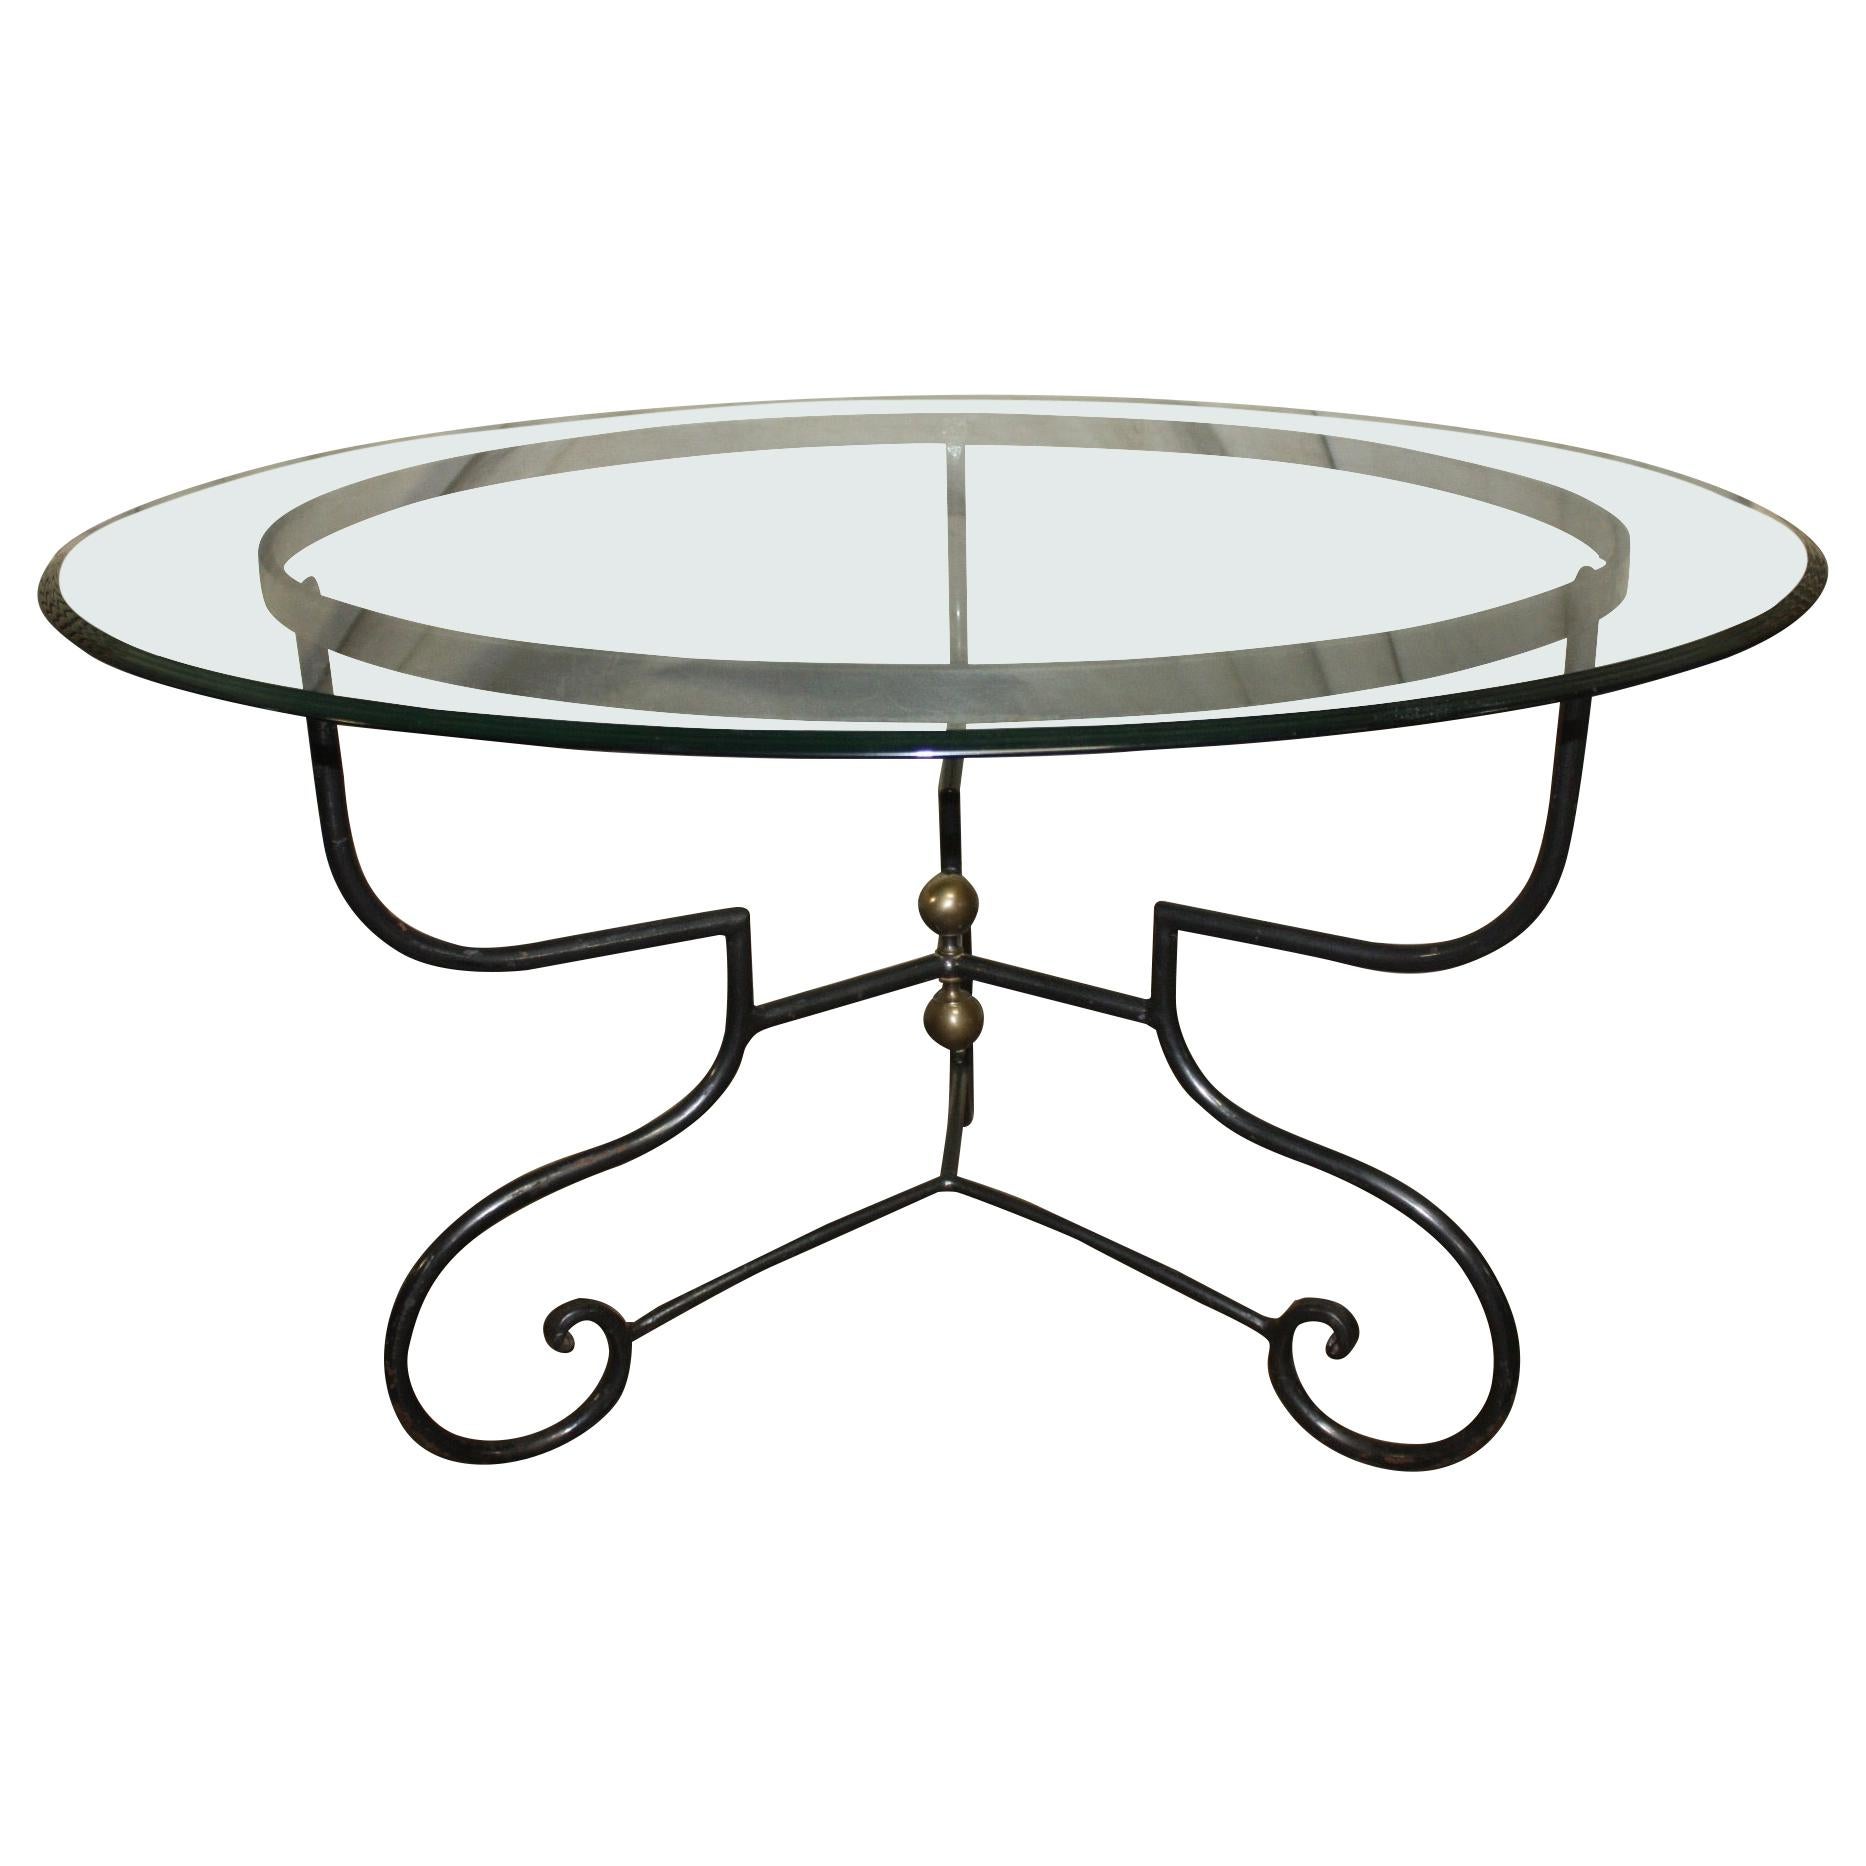 Beautiful French Iron Table